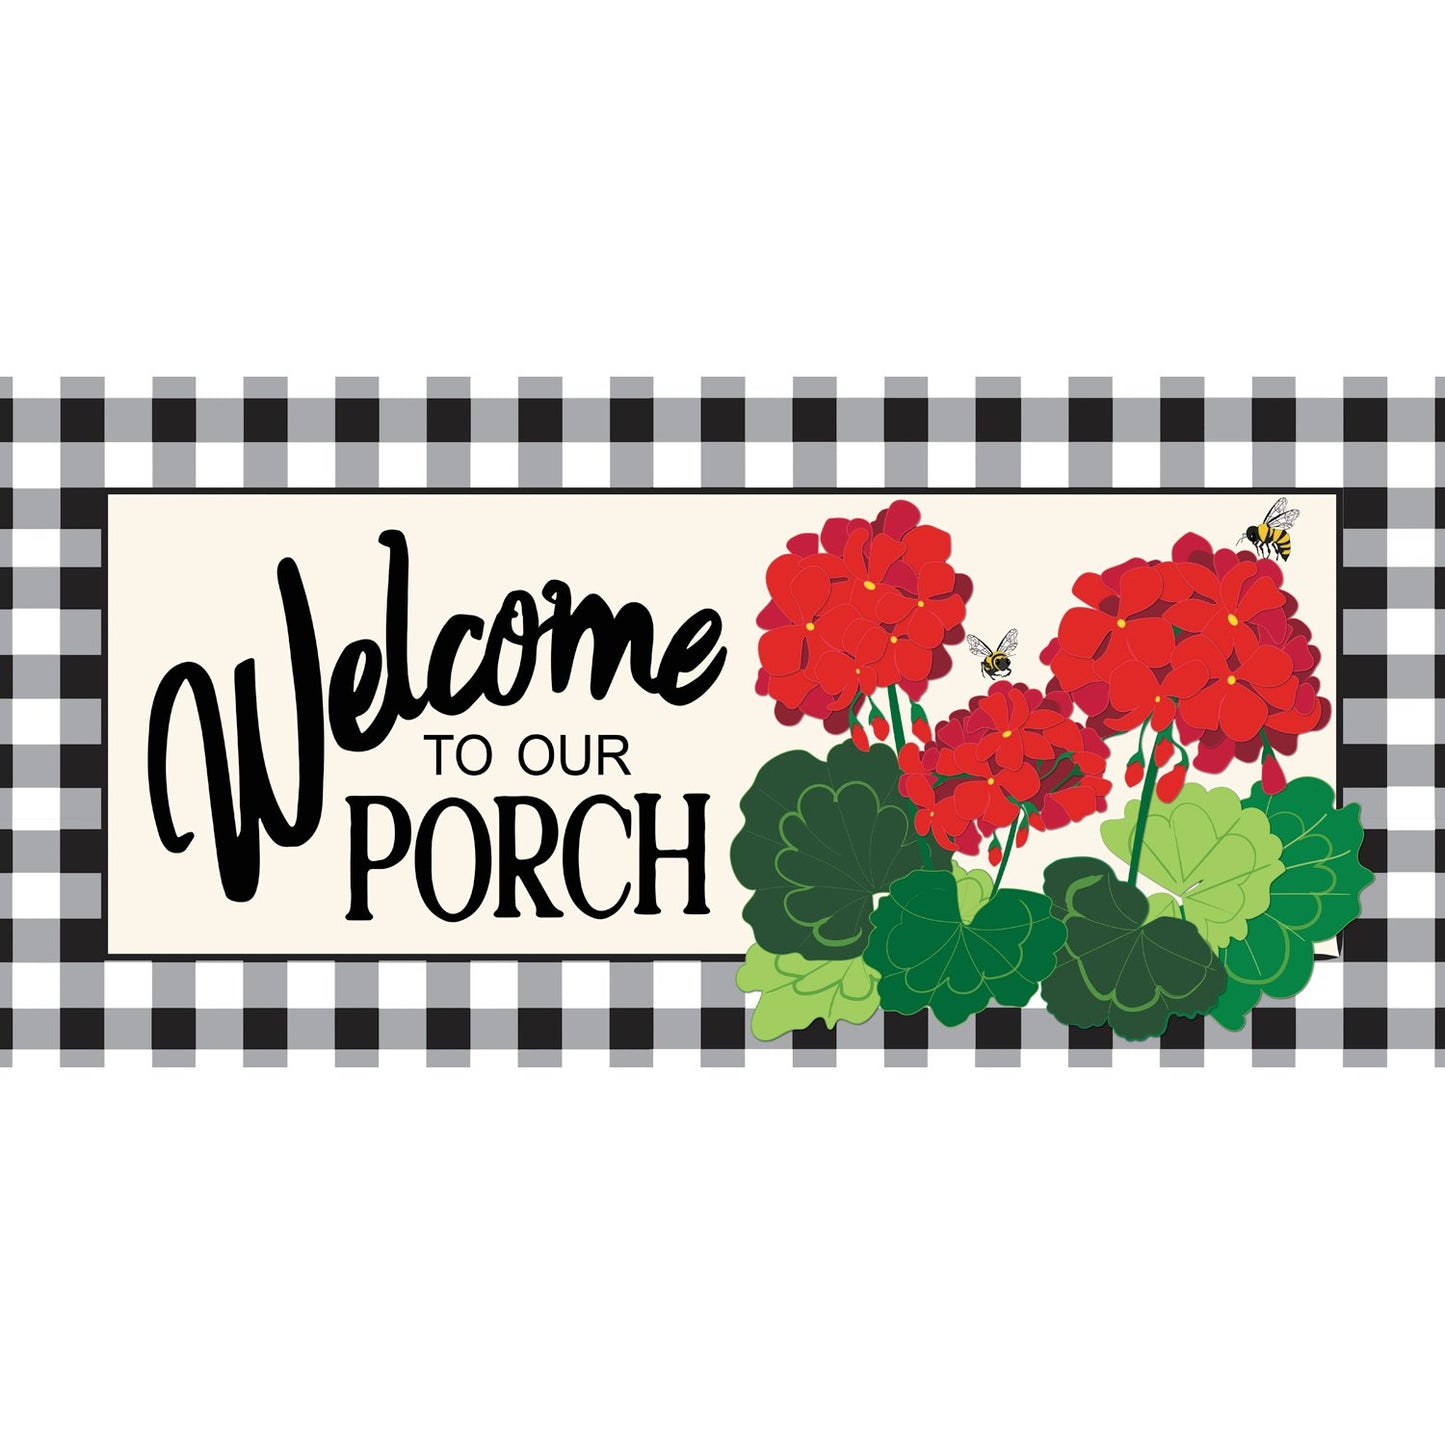 Inviting Welcome Our Porch Geraniums Sassafras Switch Mat Exclusively for Sassafras Bases